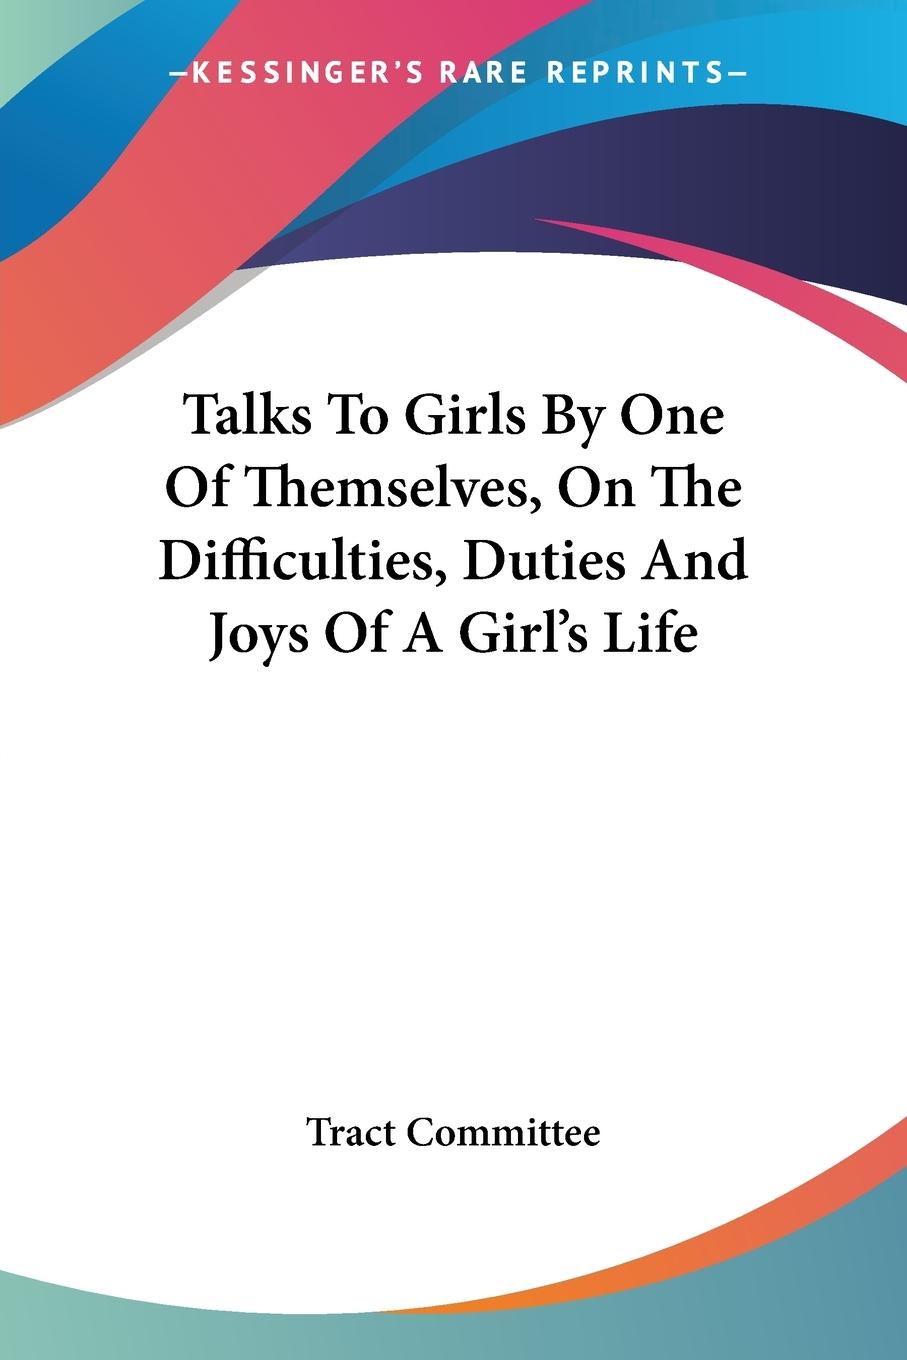 Talks To Girls By One Of Themselves, On The Difficulties, Duties And Joys Of A Girl s Life - Tract Committee